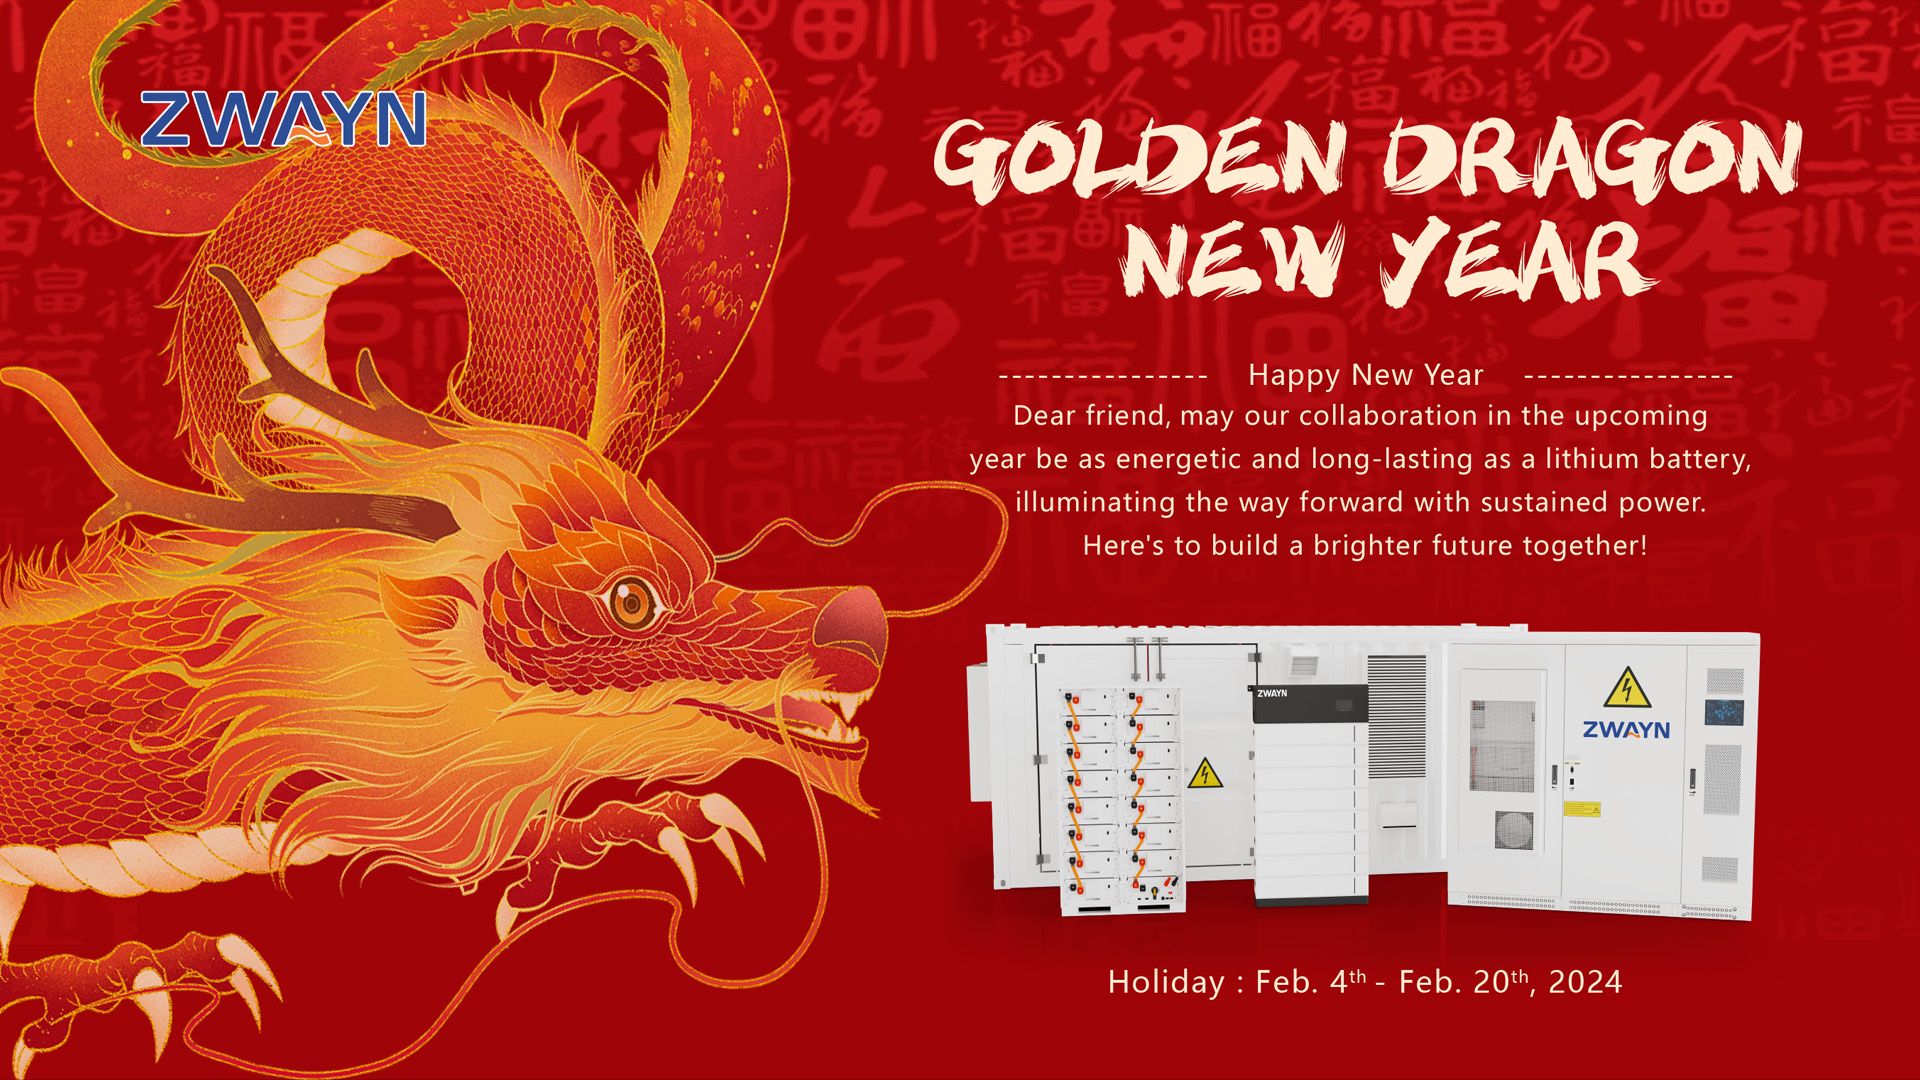 Powering Success in the Lithium Battery Industry: Wishing Our Valued Customers a Prosperous Year of the Dragon